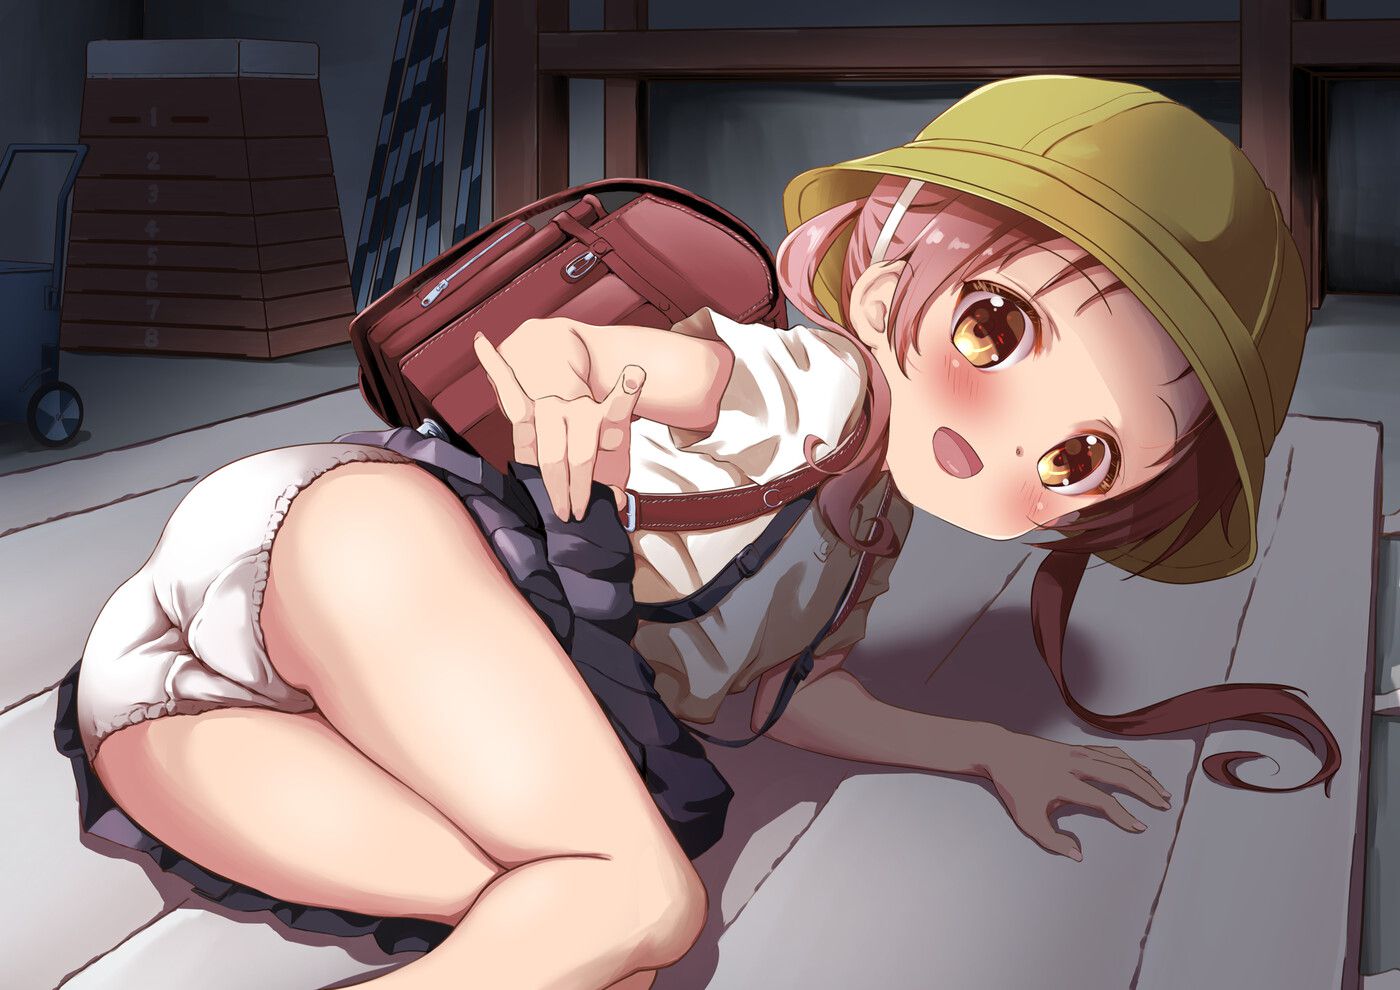 【Excited about Lori pants】 Lori pants secondary erotic image excited by looking at the cute figure of the treasure of the pants of the secondary loli girl 38